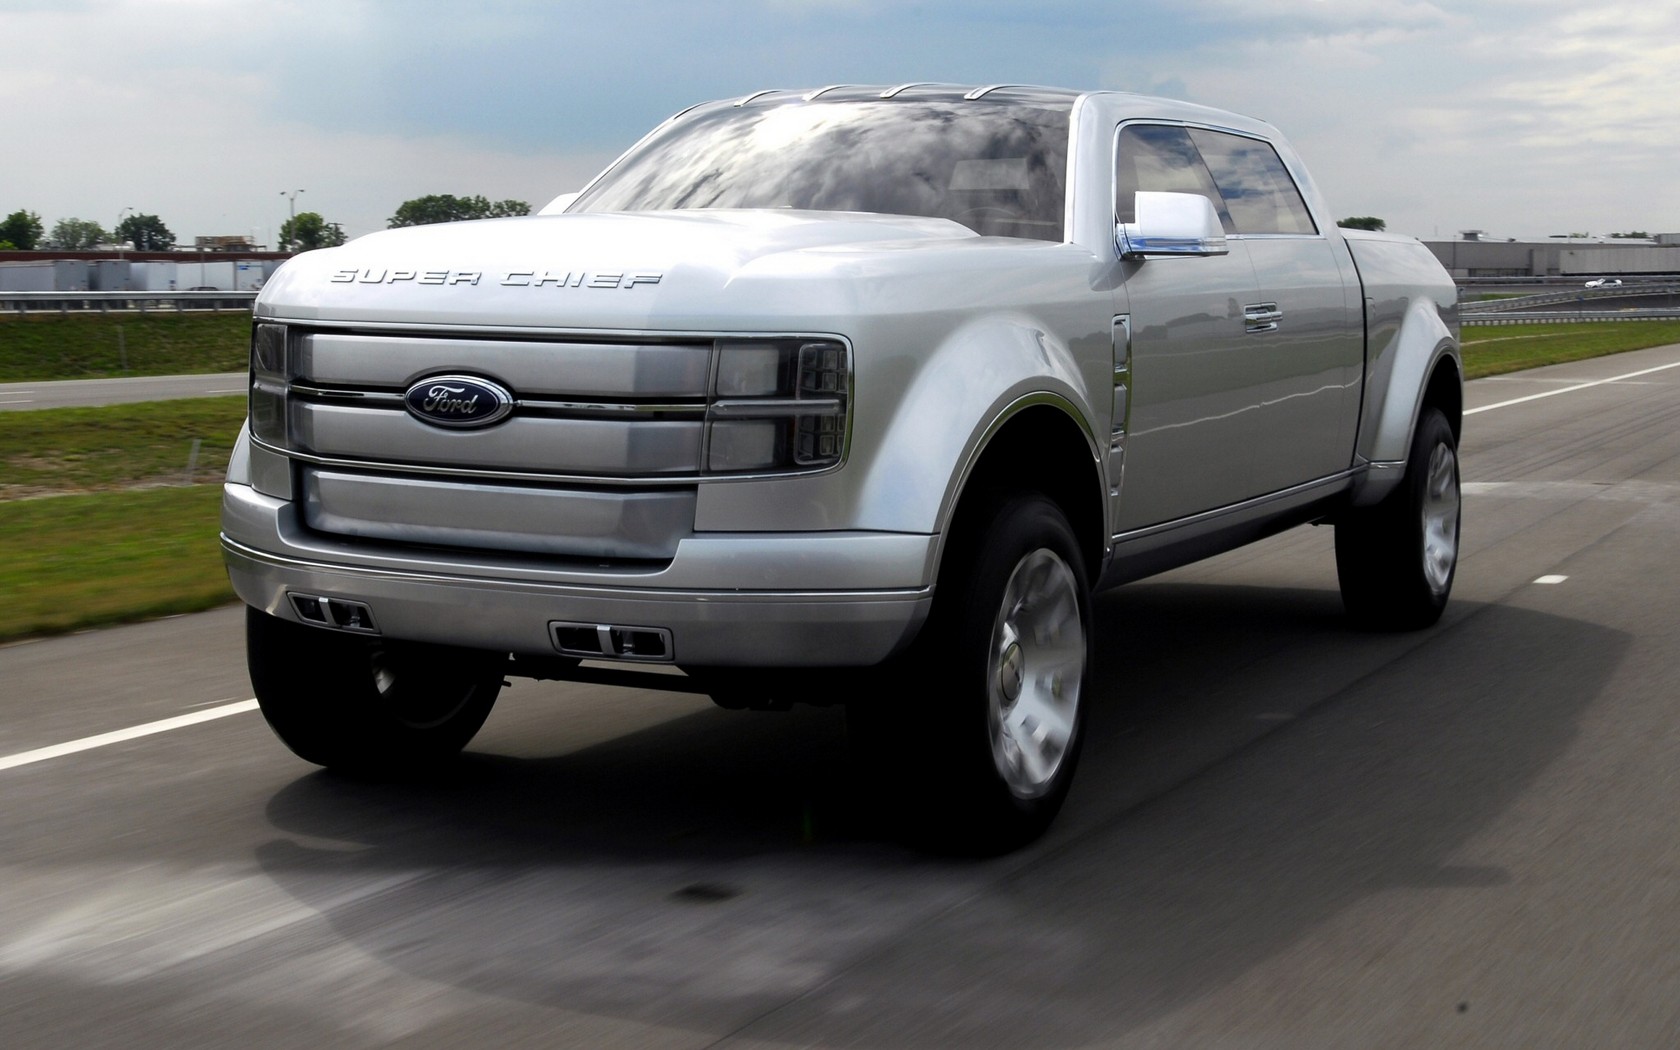 Download full size Ford F-250 Super Chief Ford wallpaper / 1680x1050